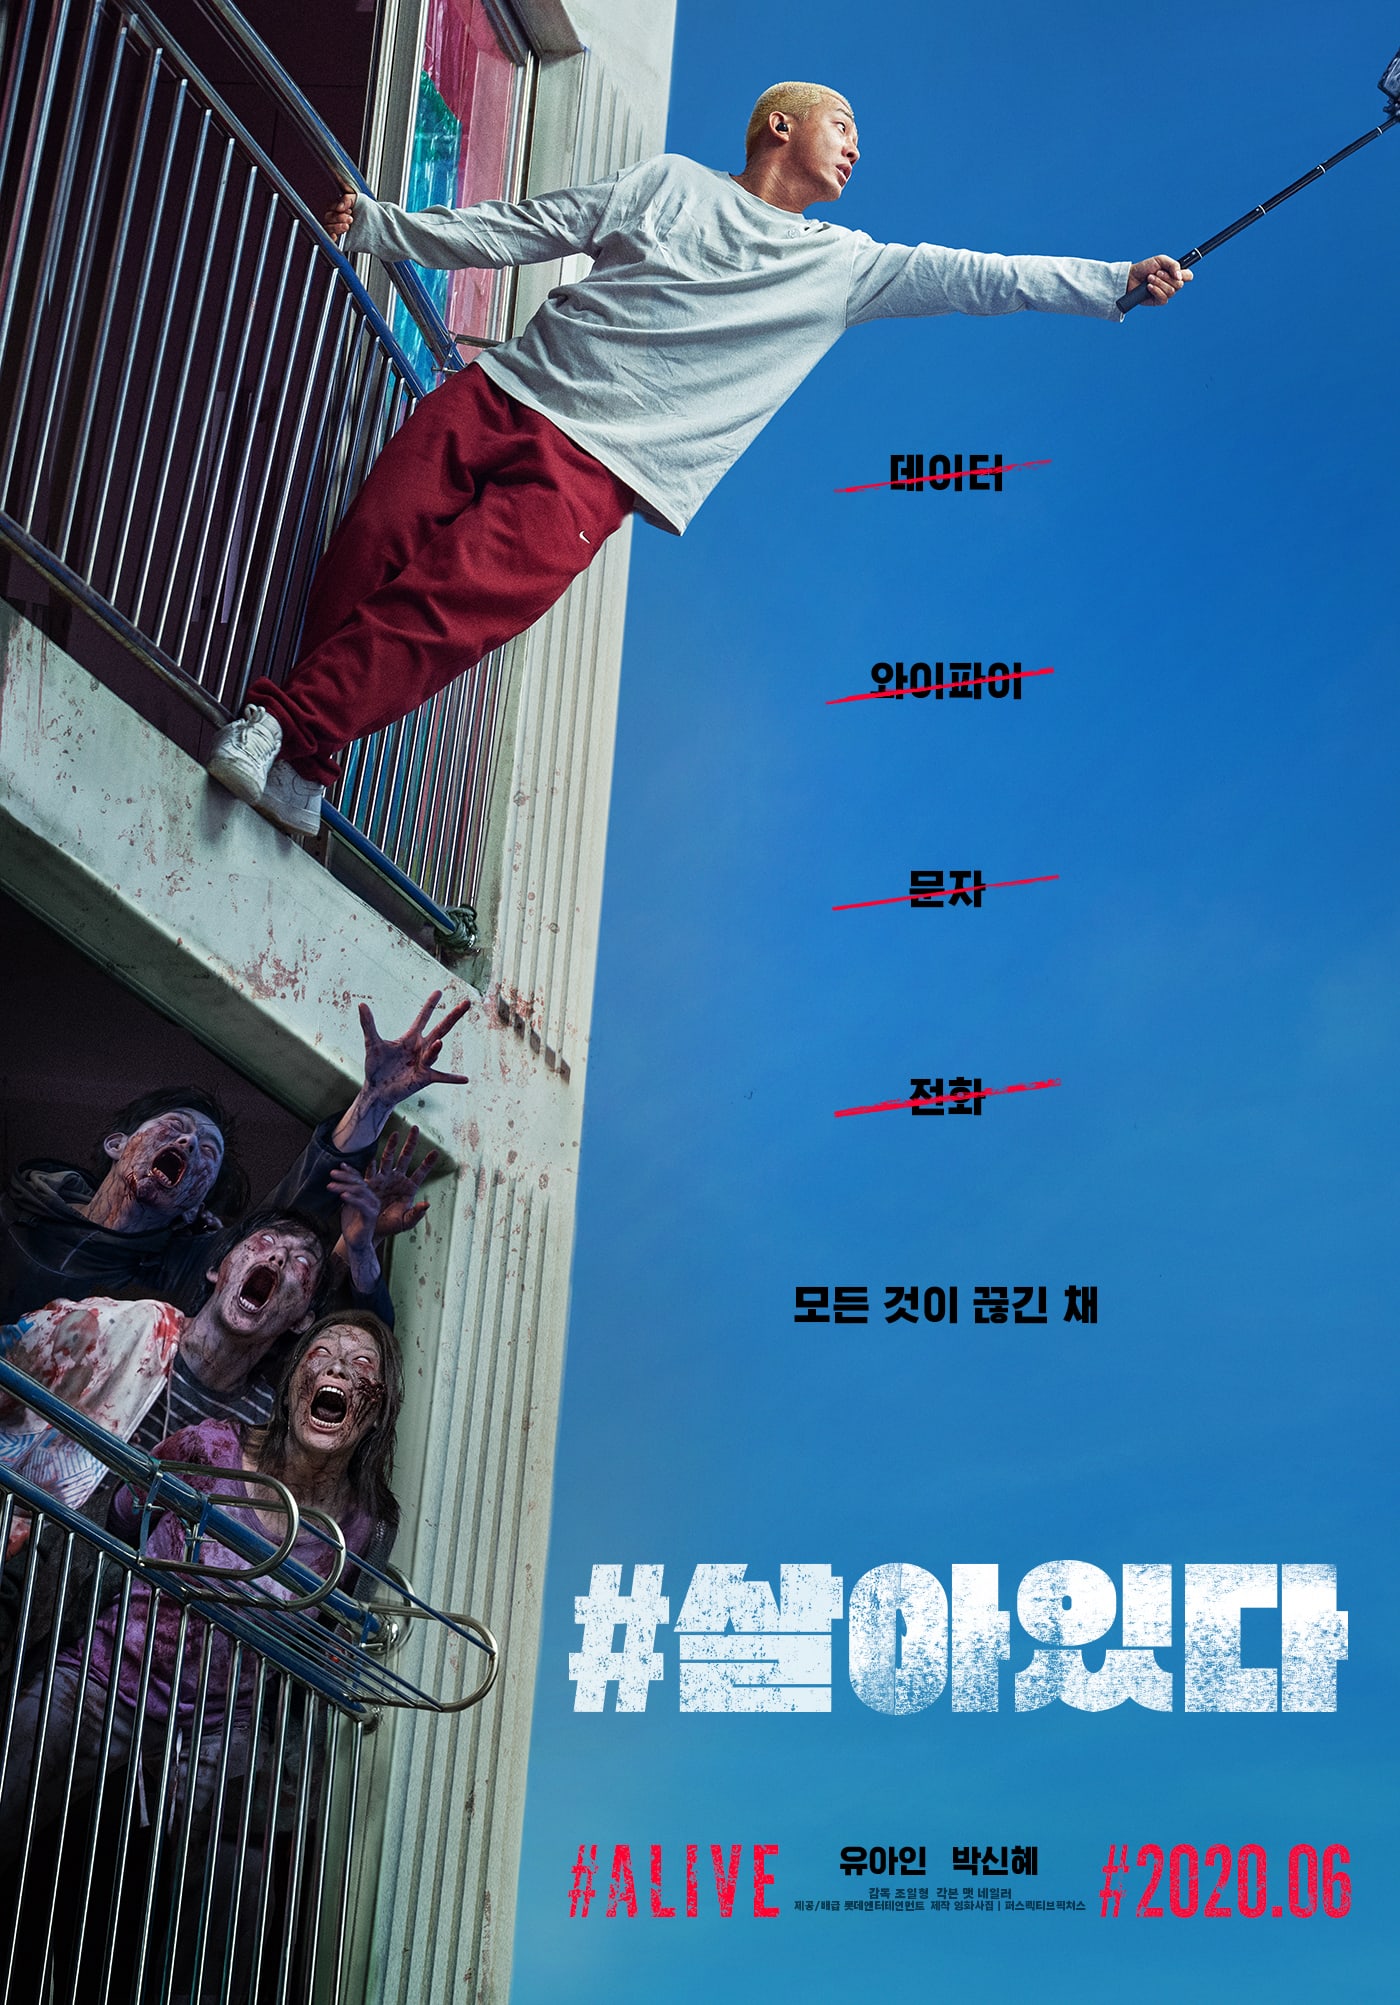 park-shin-hye-yoo-ah-in-upcoming-zombie-movie-reveals-posters-and-new-title-1